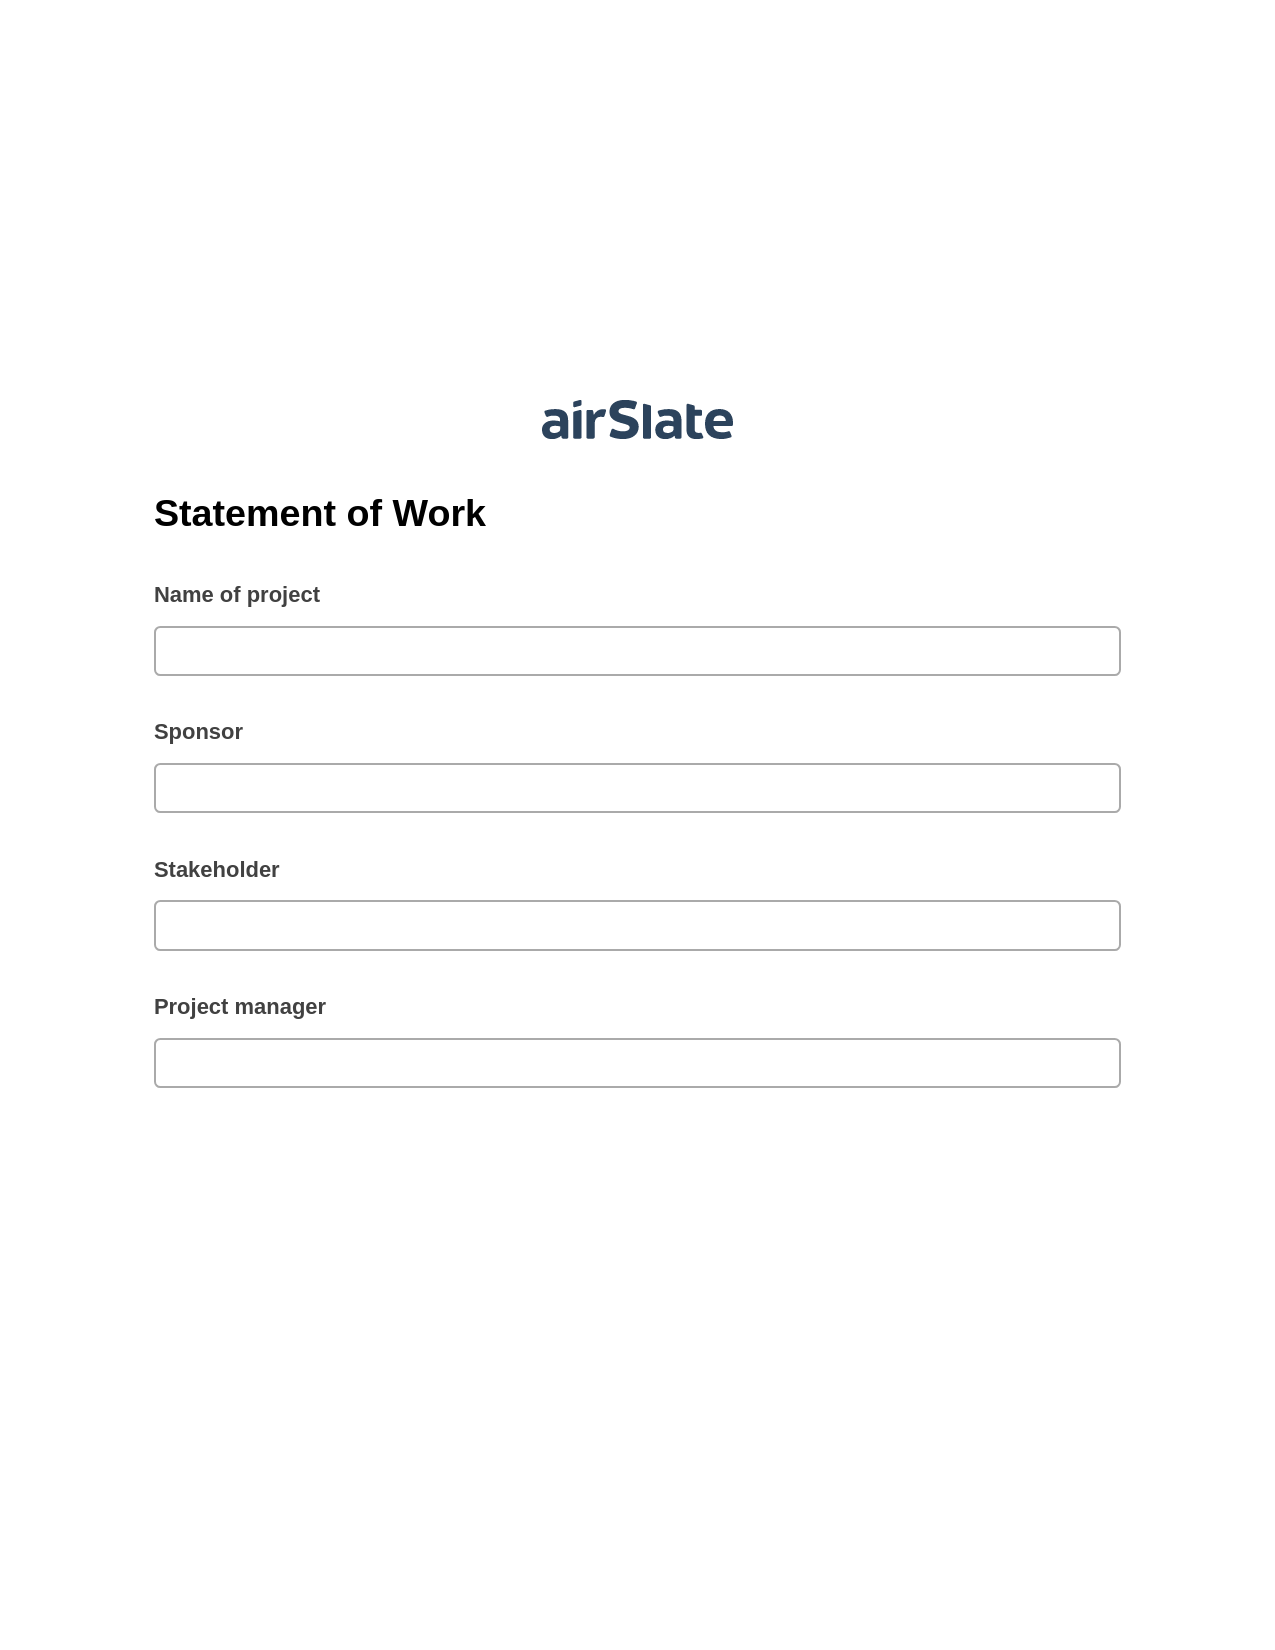 Statement of Work Pre-fill from CSV File Dropdown Options Bot, Add Tags to Slate Bot, Webhook Postfinish Bot